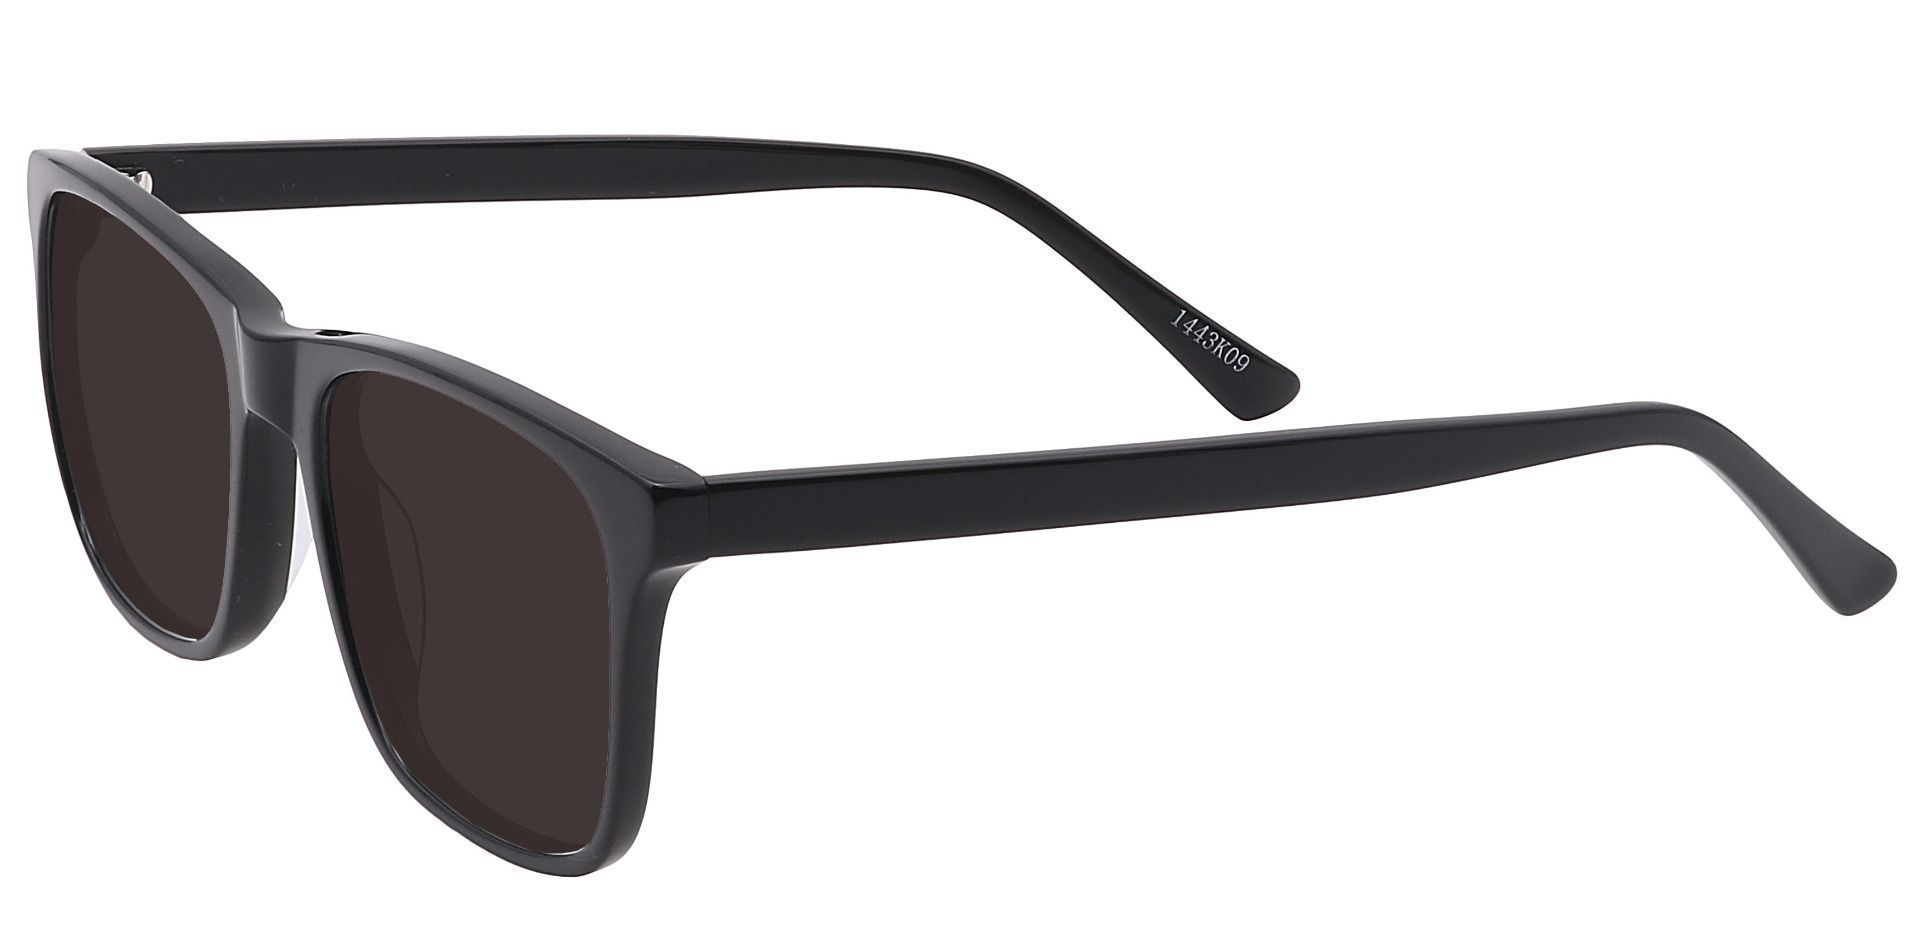 Cantina Square Reading Sunglasses - Black Frame With Gray Lenses